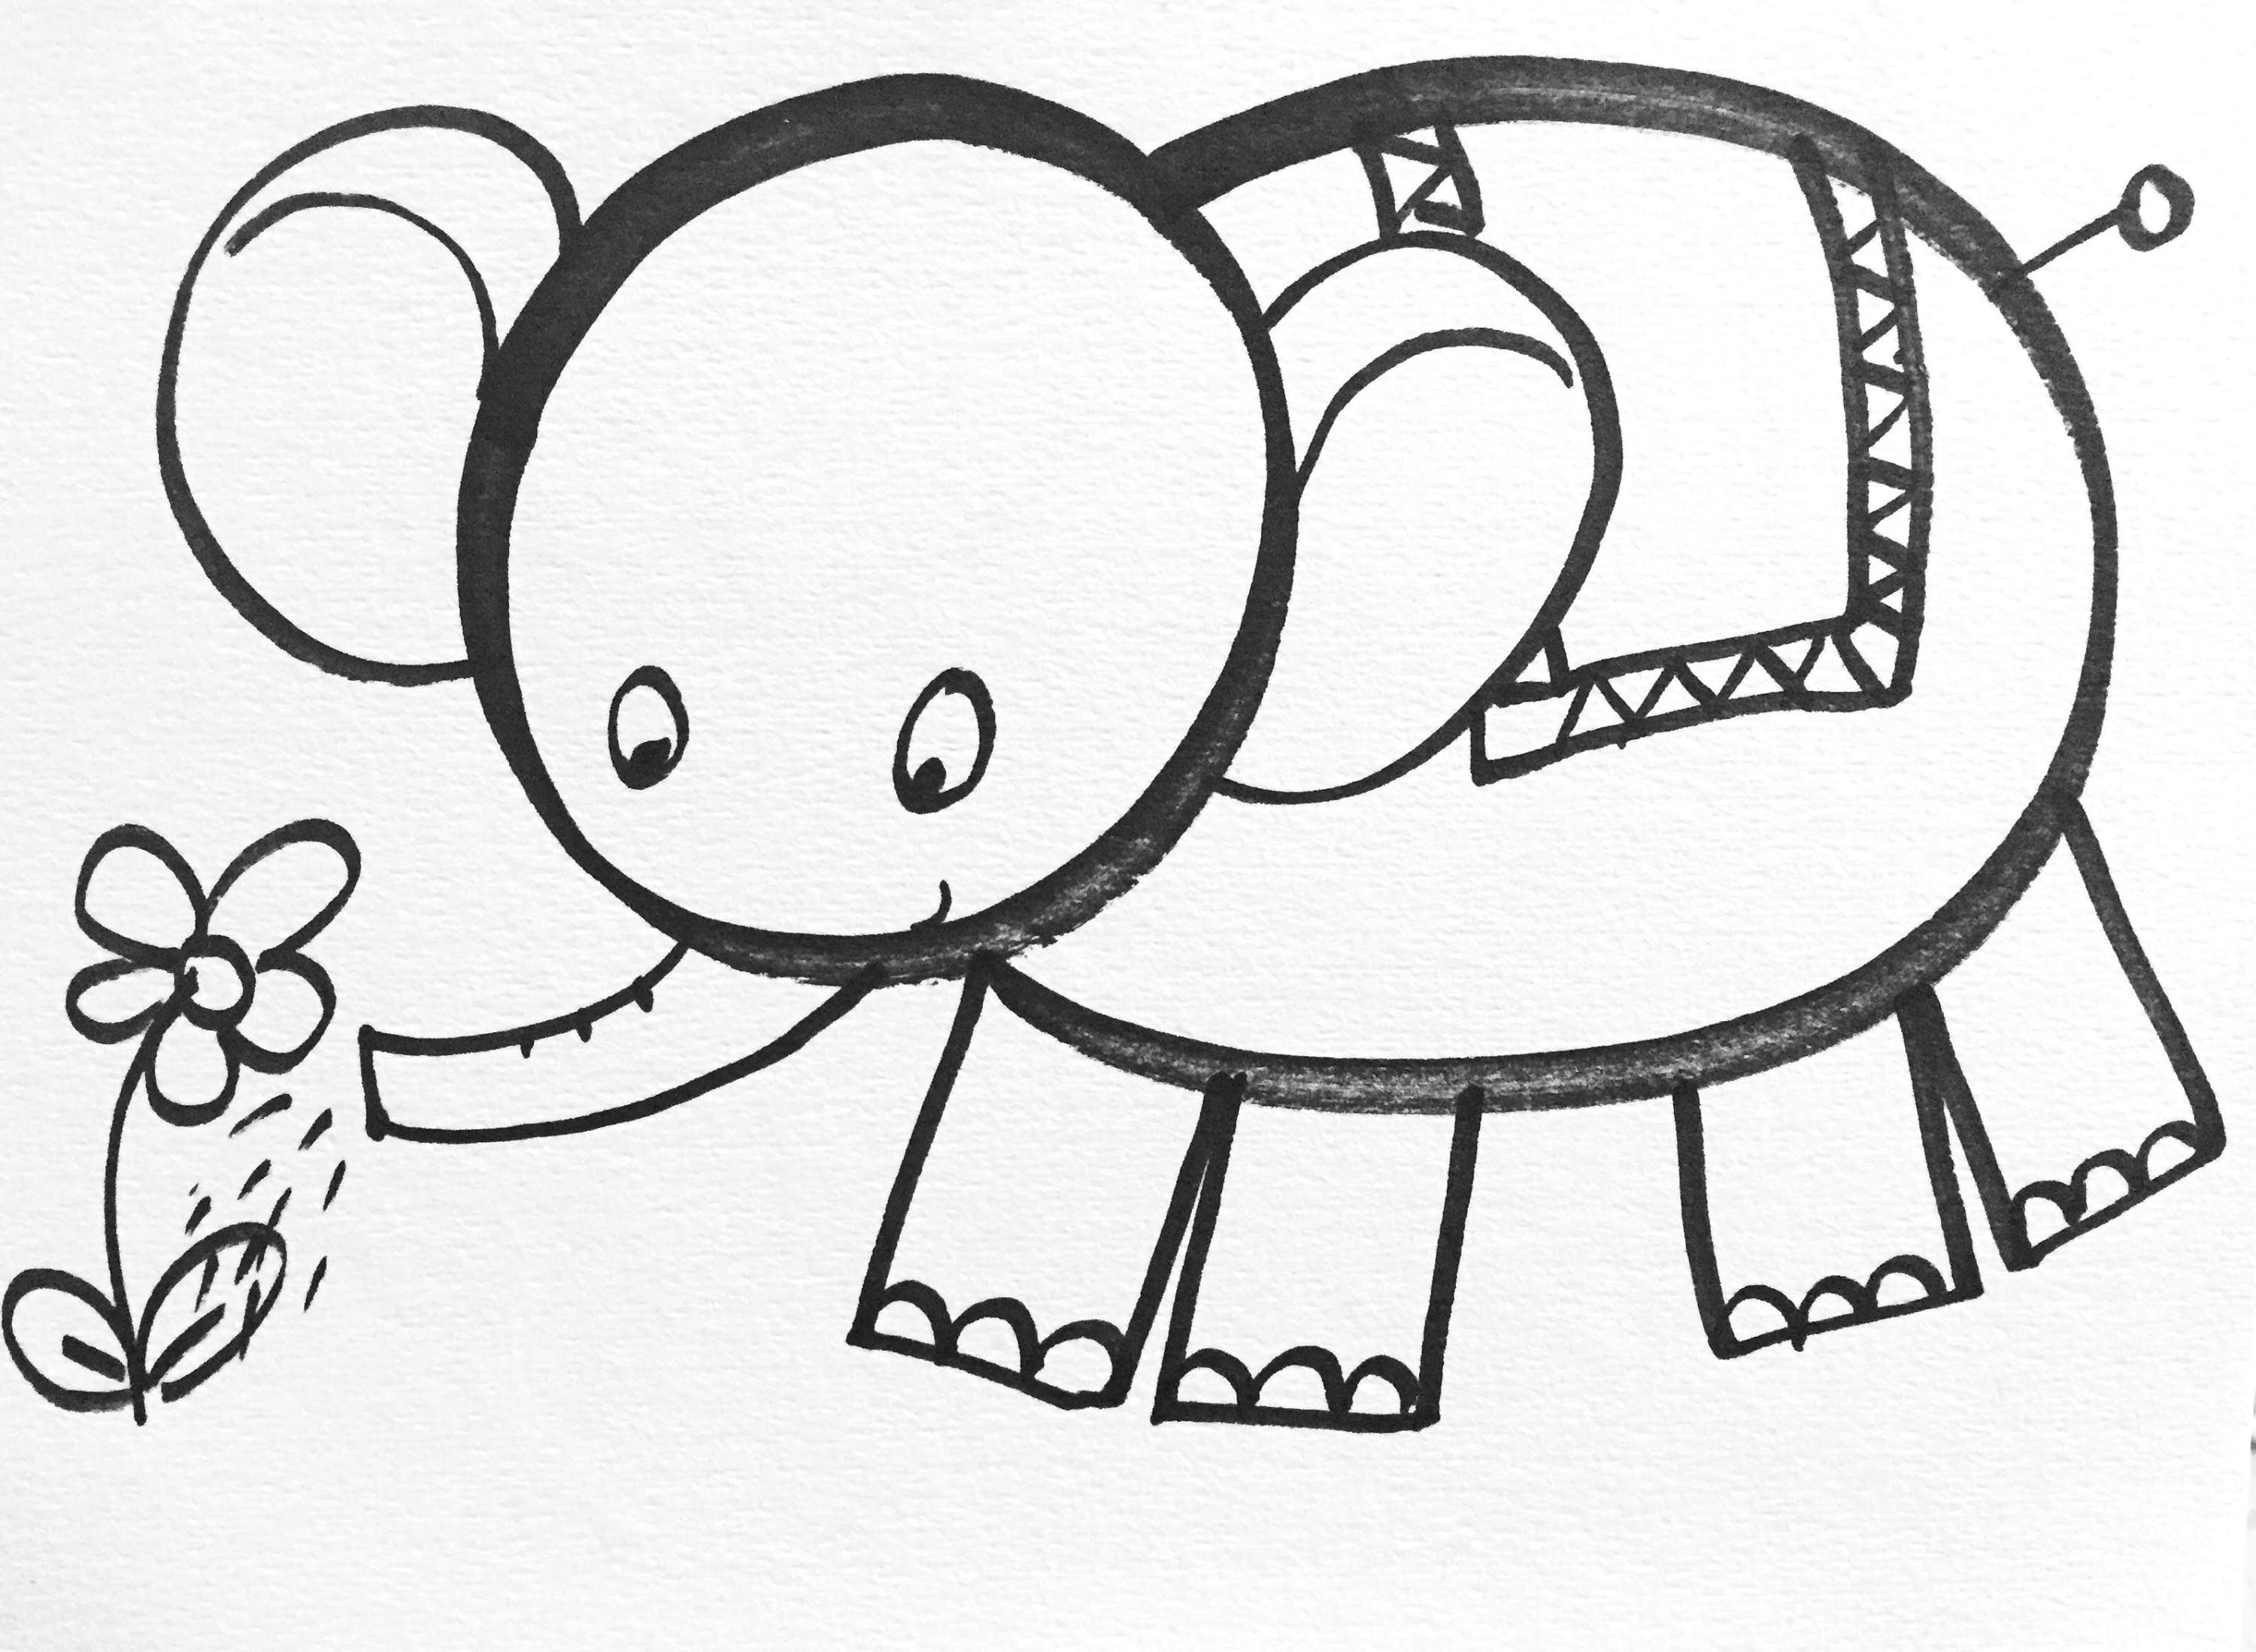 Drawing A Cartoon Elephant Step by Step Learn How to Draw Easy In This Drawing You Can Learn to Draw the